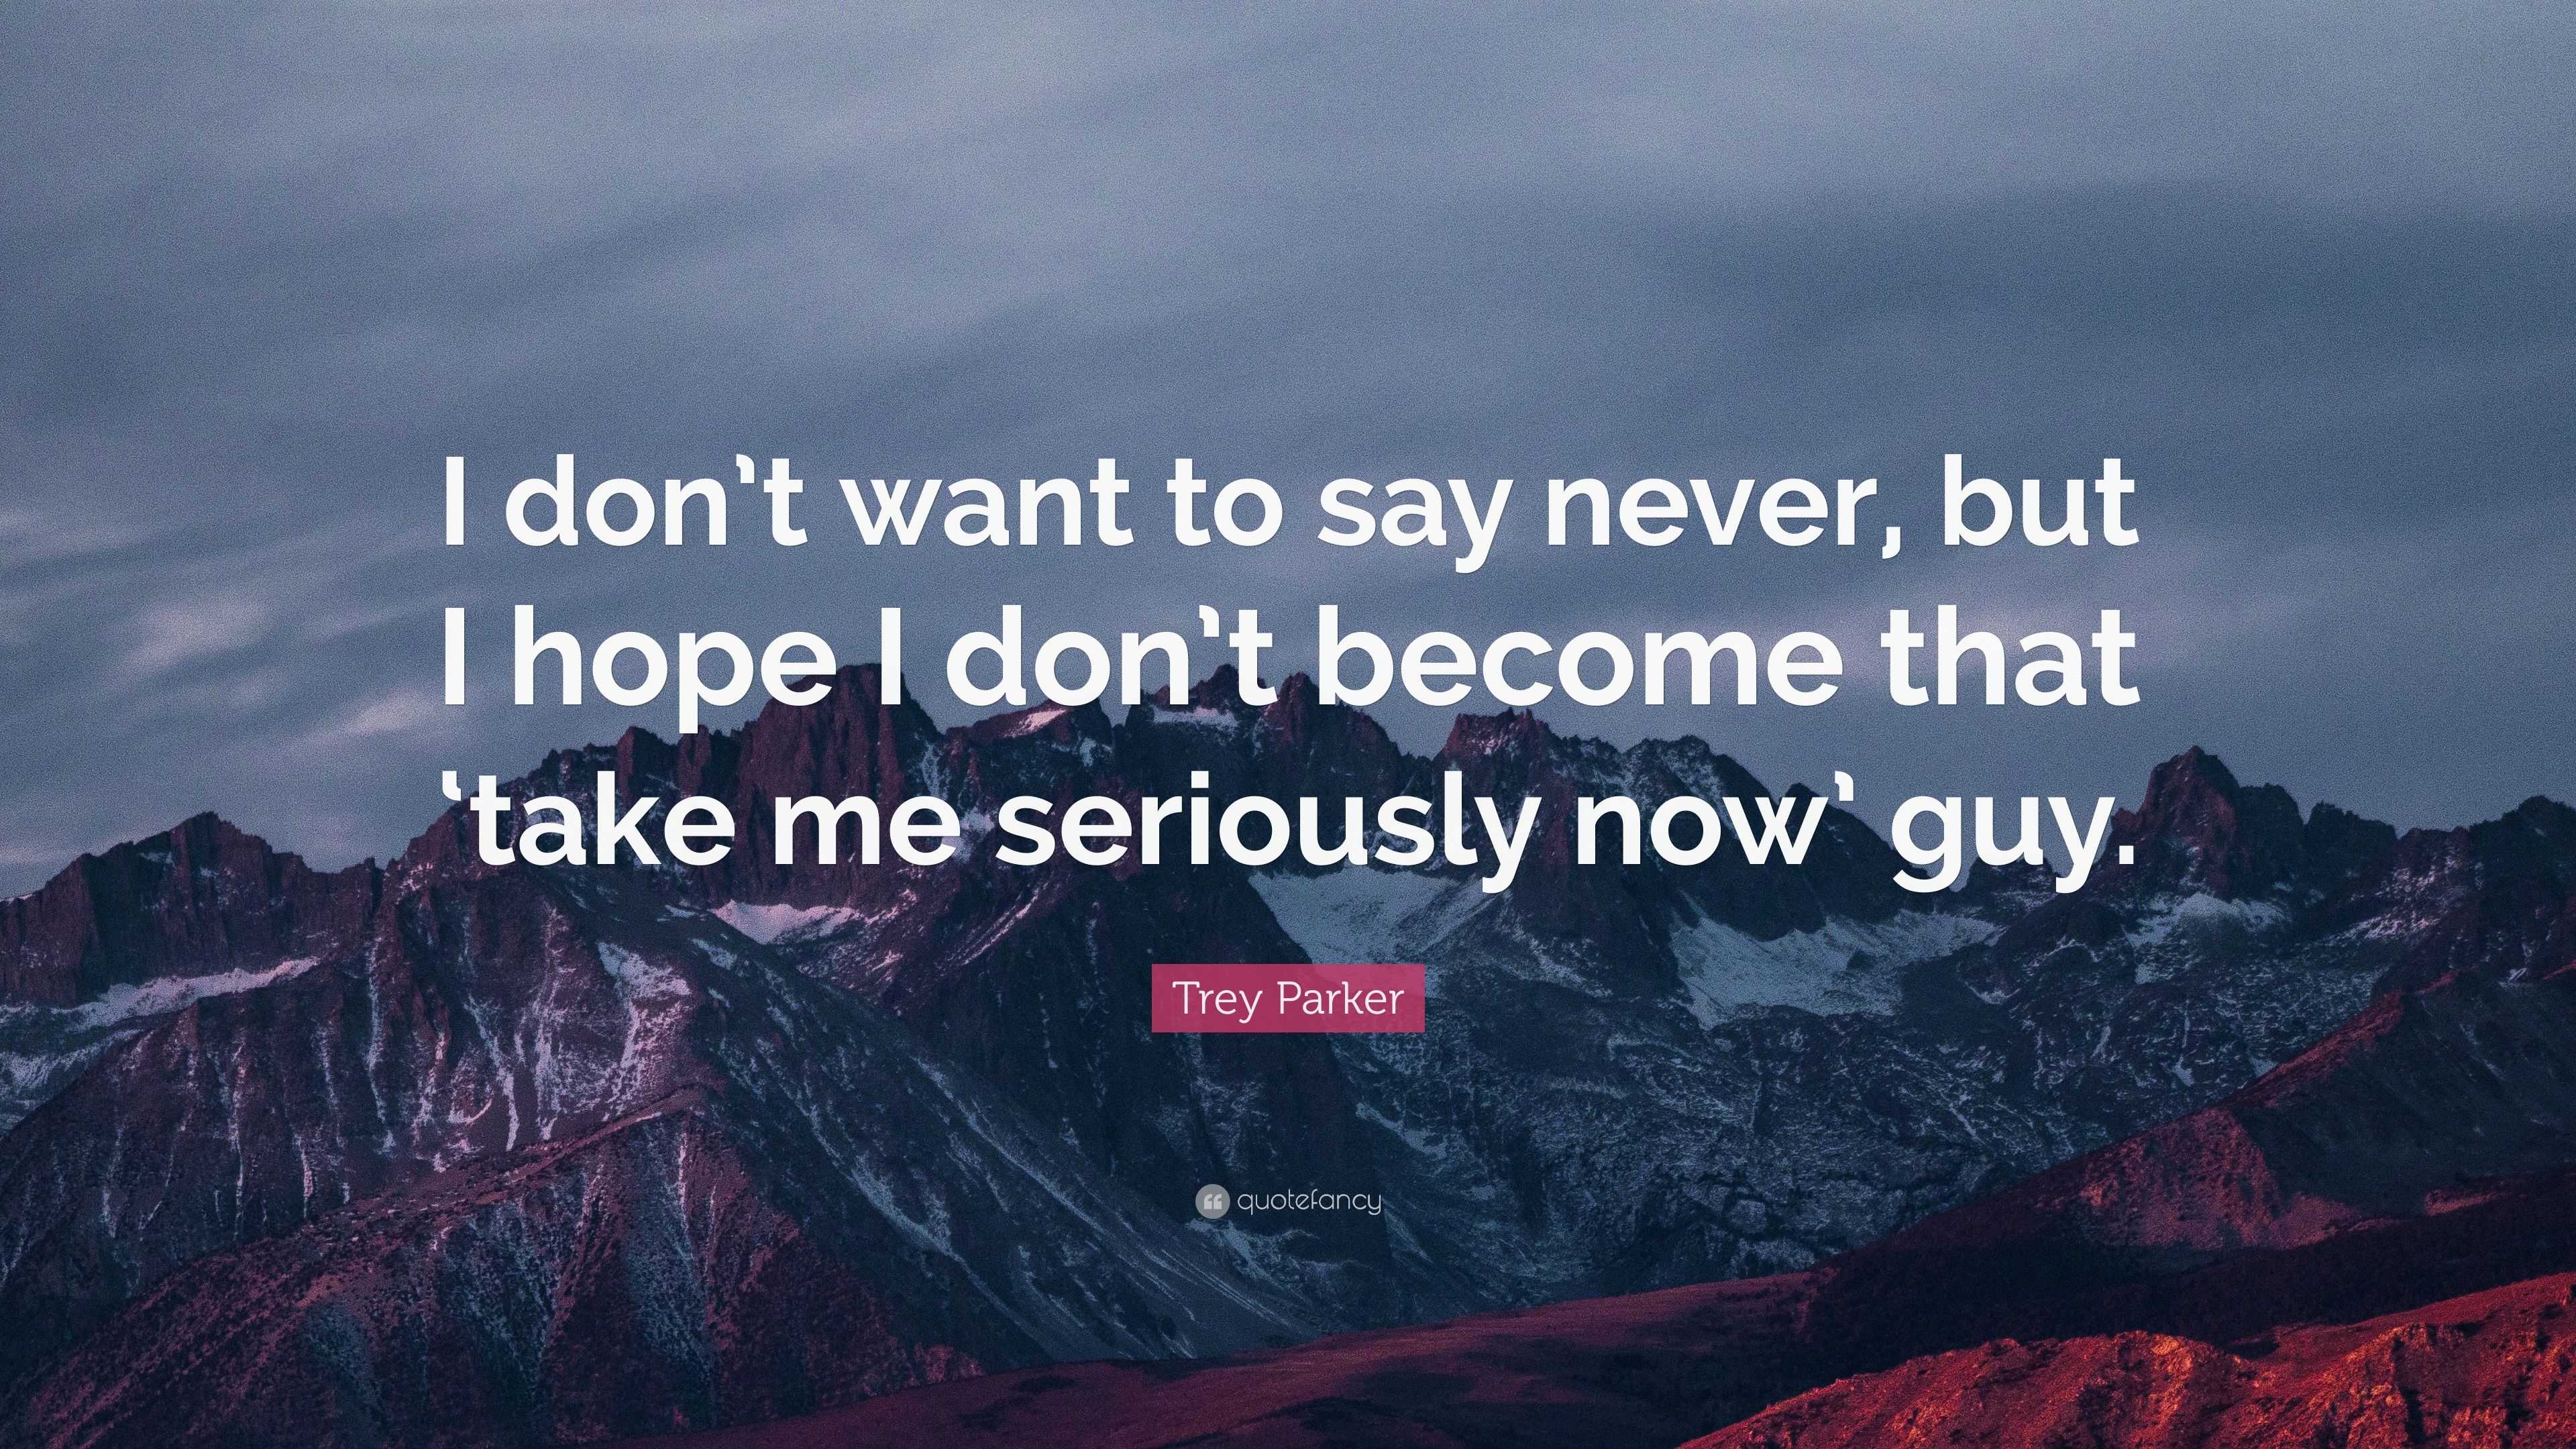 Trey Parker Quote: “I don’t want to say never, but I hope I don’t ...